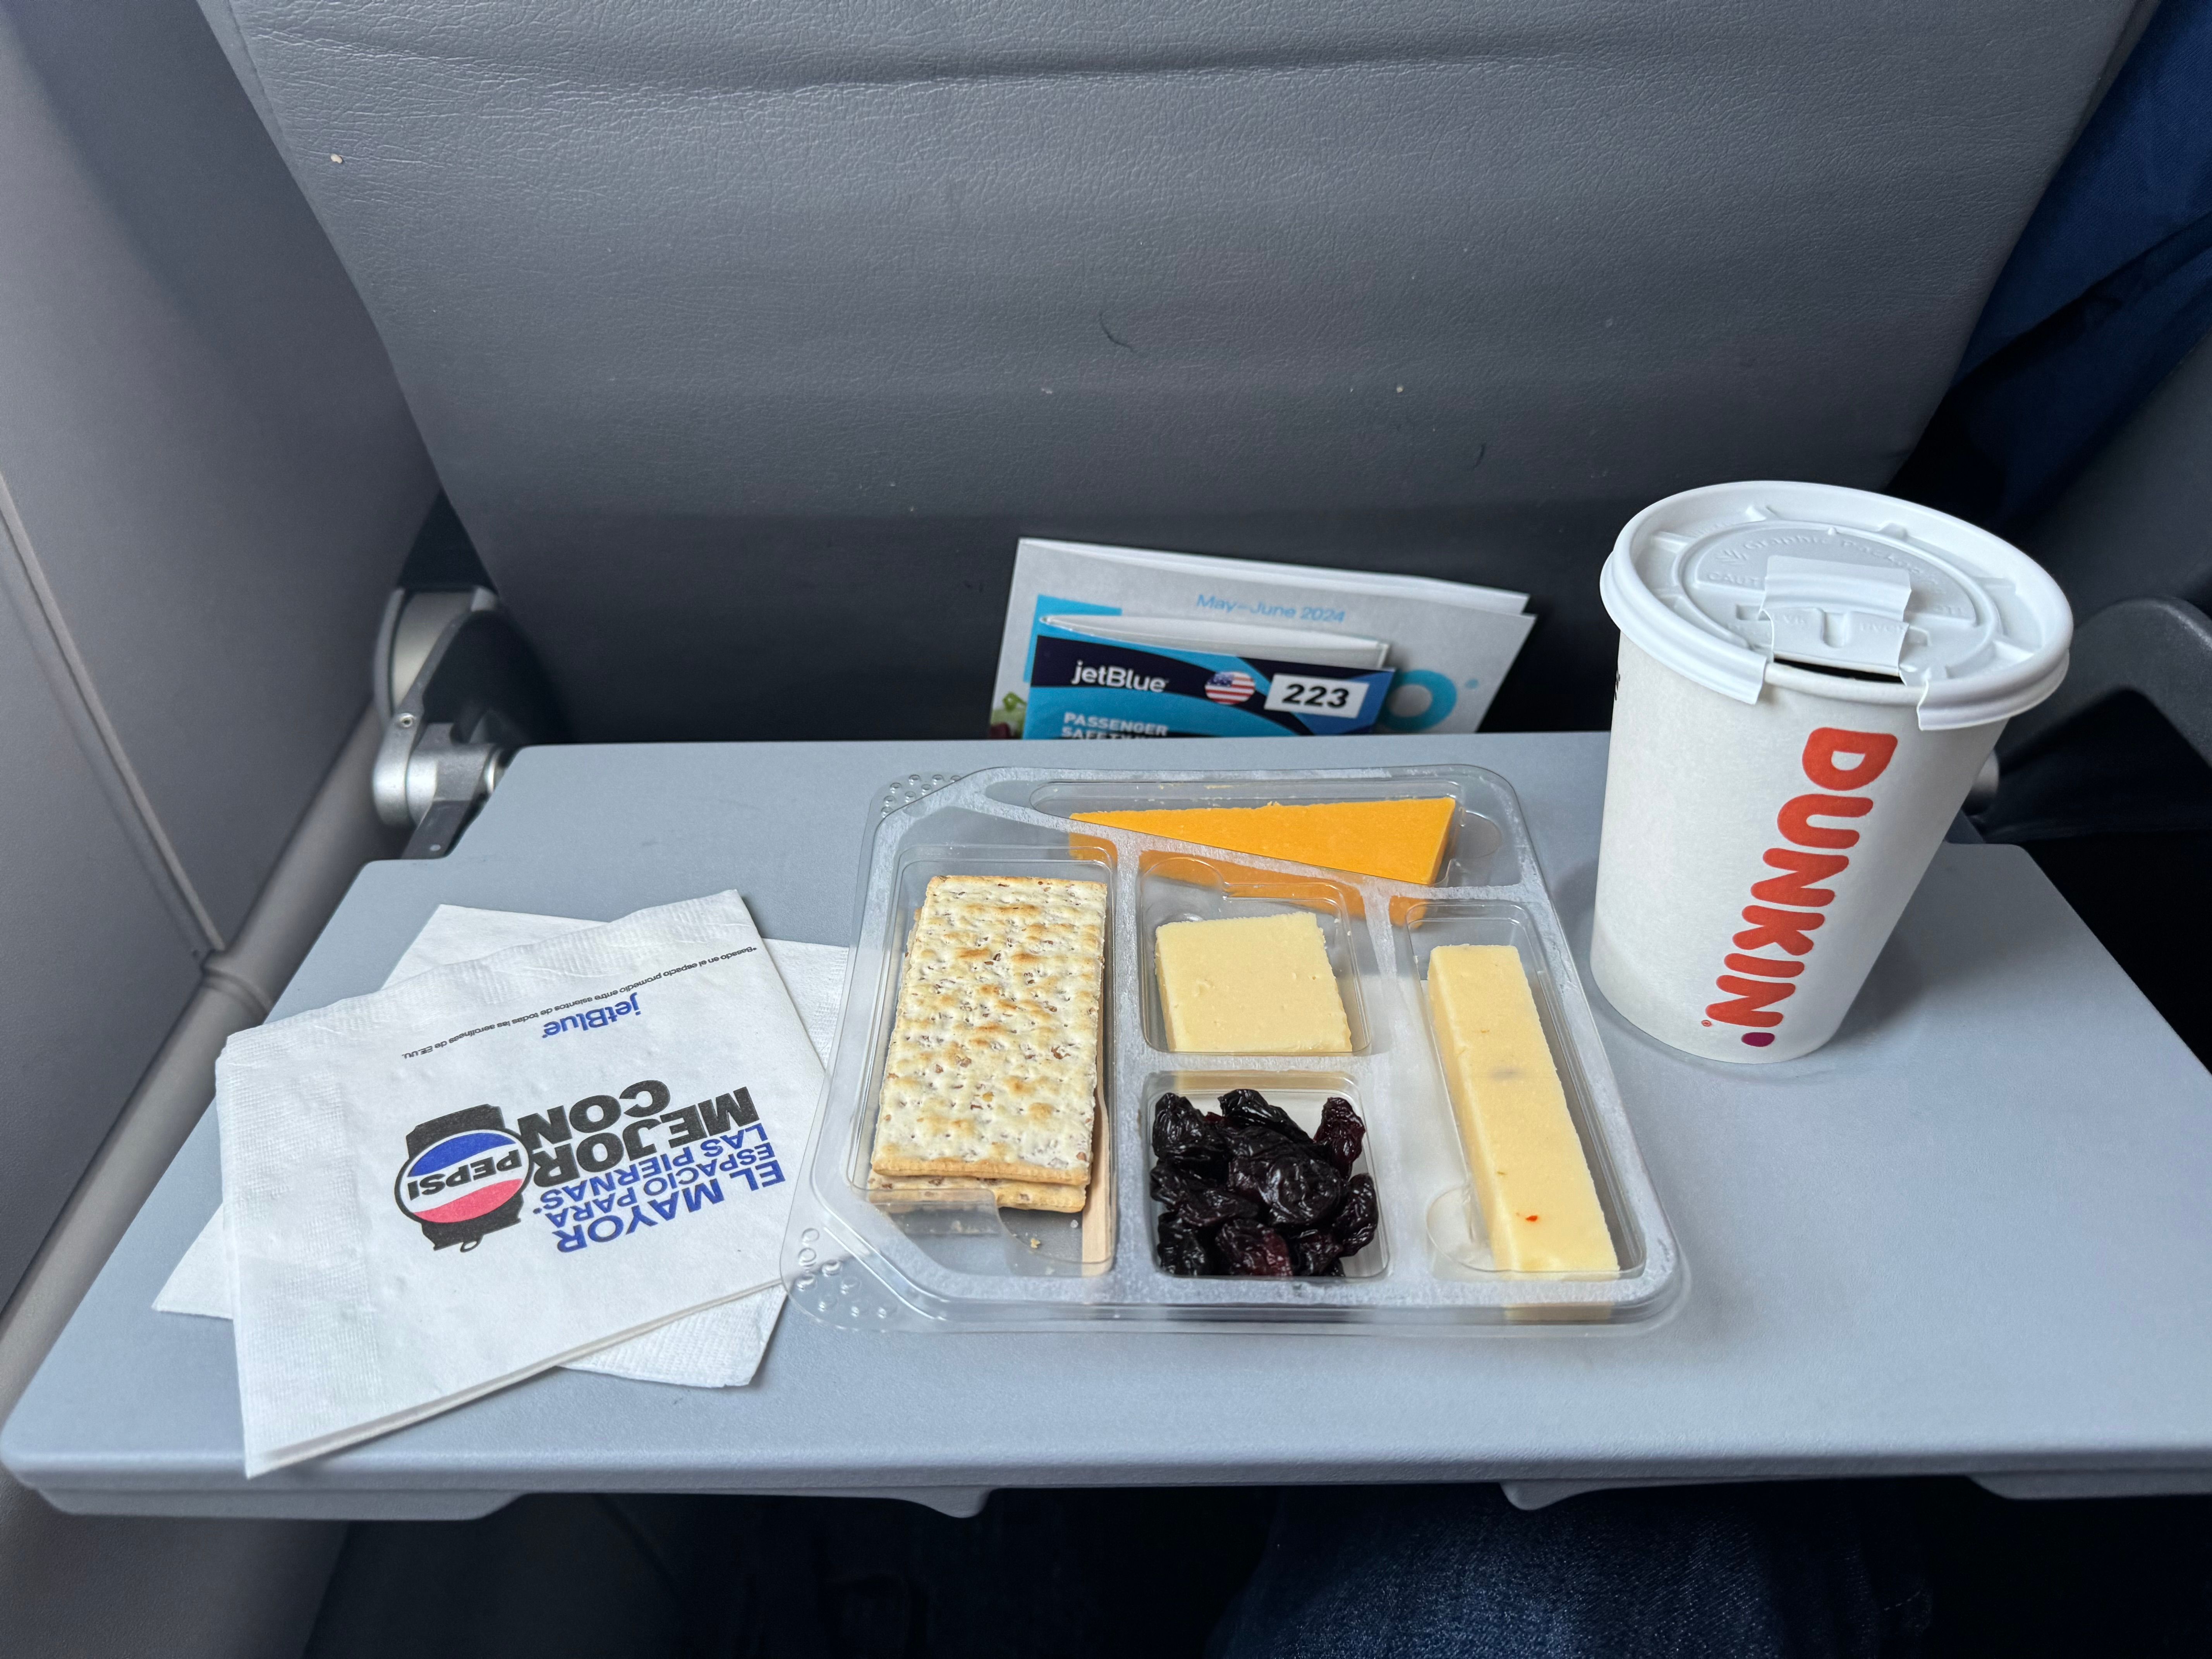 The JetBlue cheese snack platter